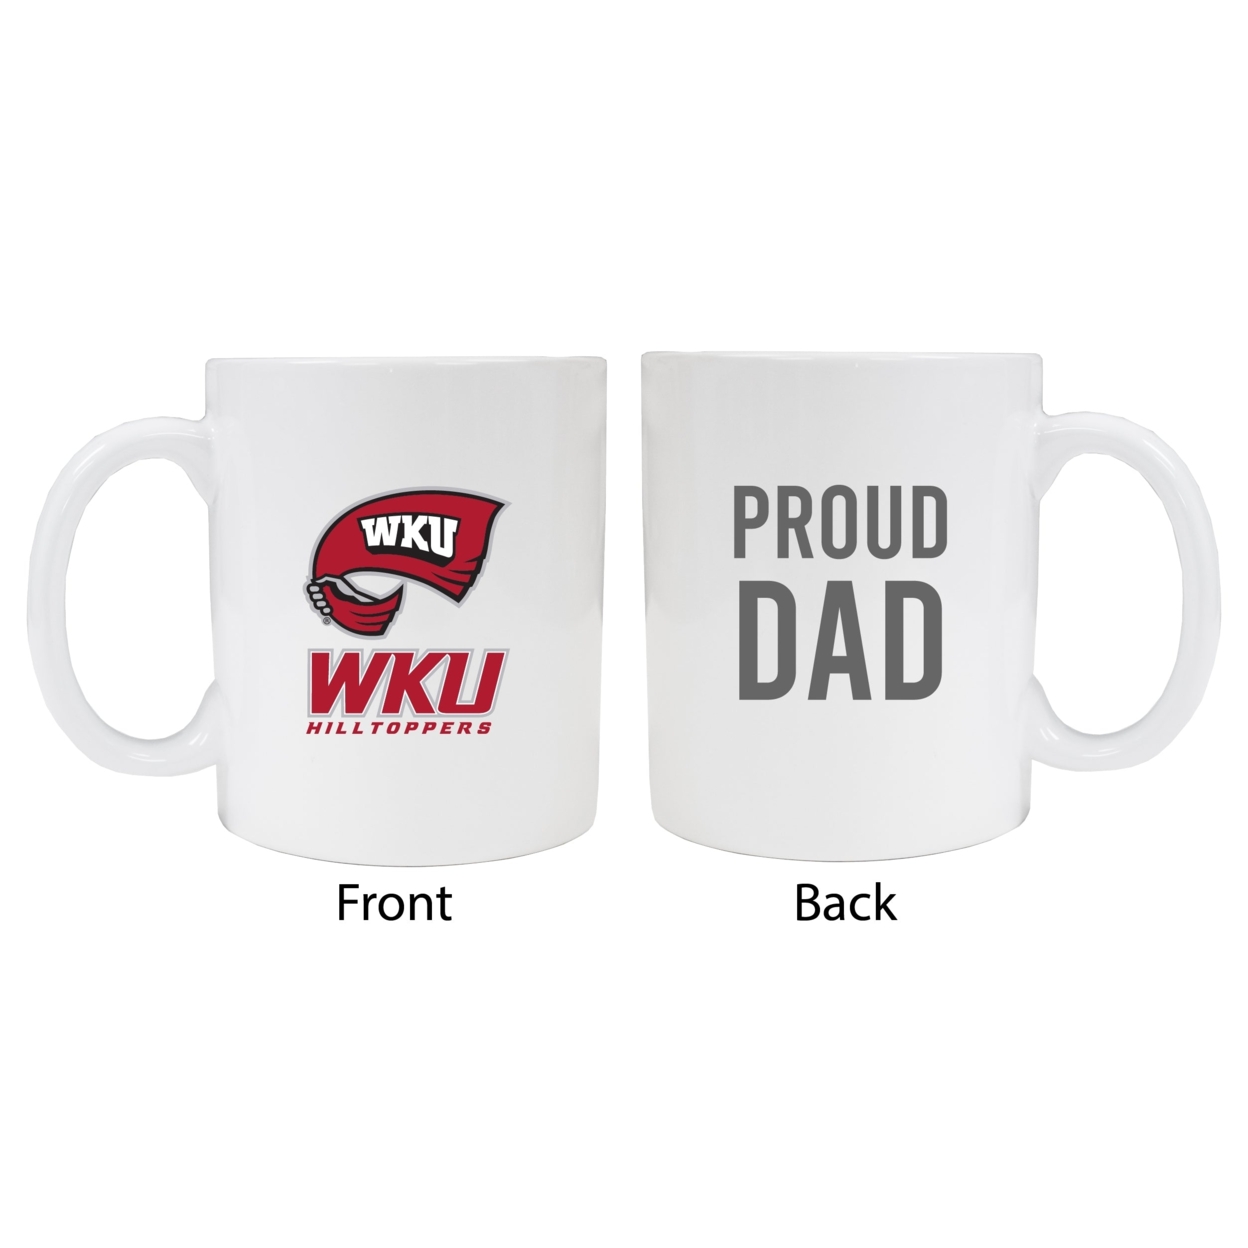 Western Kentucky Hilltoppers Proud Dad Ceramic Coffee Mug - White (2 Pack)